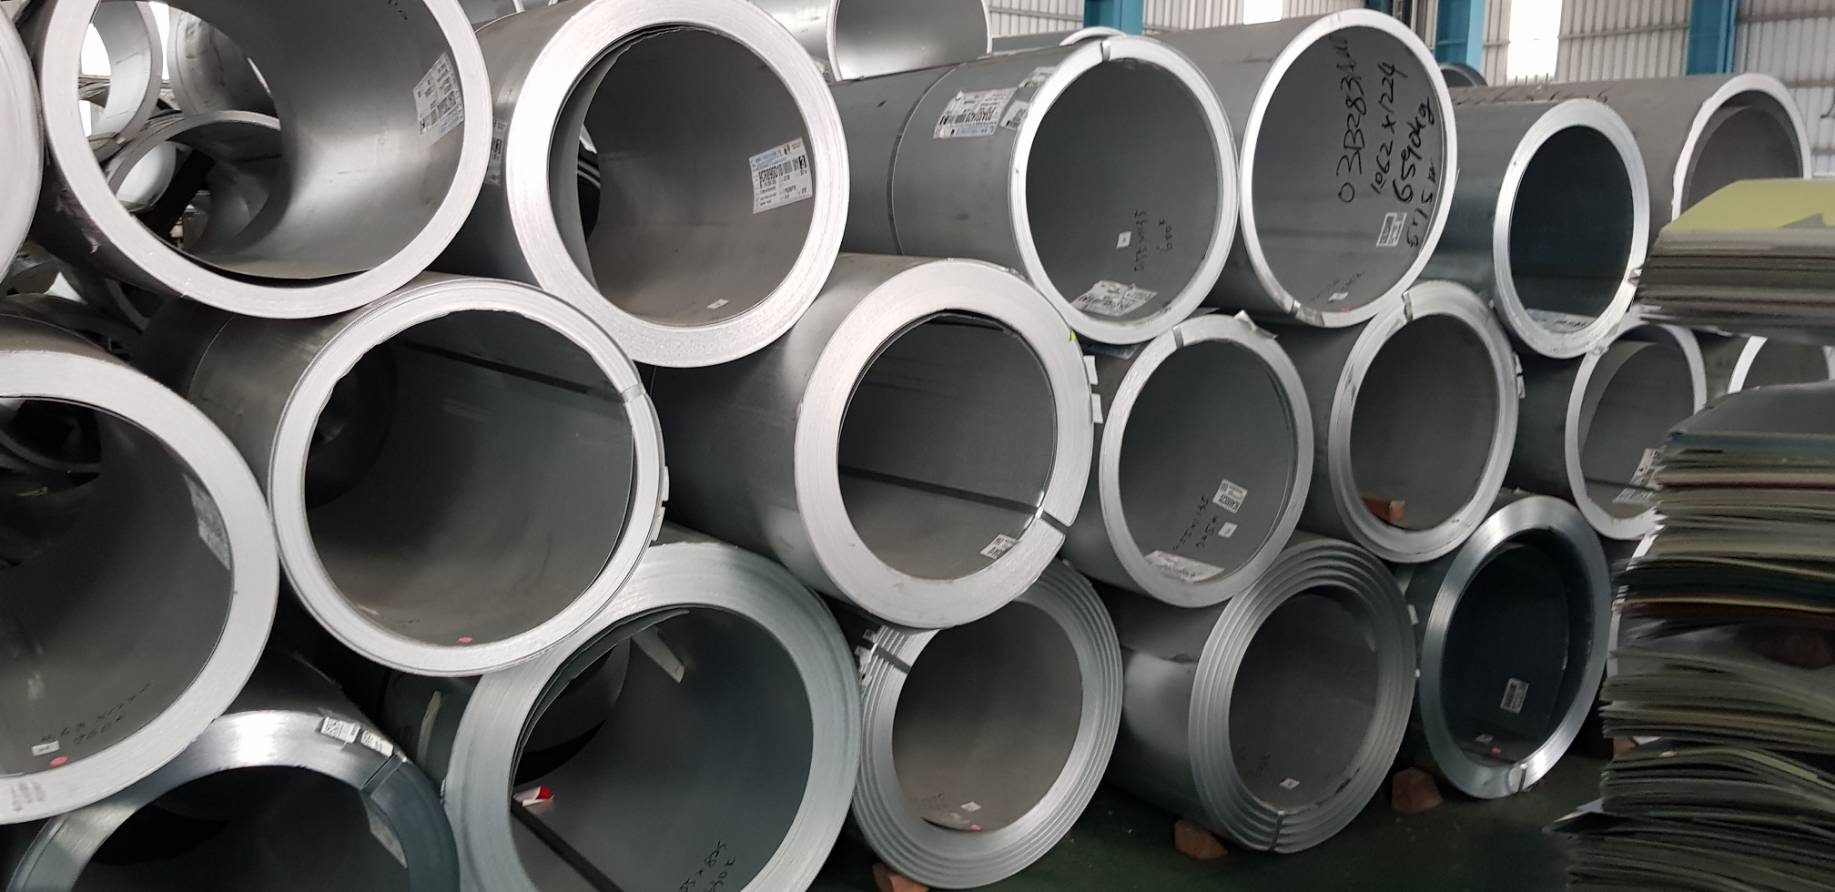 GI/ GL Coils (Secondary quality) / 143 MT EX TAIWAN   Pleased to offer: GI/ GL Coils (Secondary quality) Taiwan Origin Qty : 143 MT  Packing List attached Price : USD 525/MT CNF  Ready for immediate shipment, looking forward to your interest.